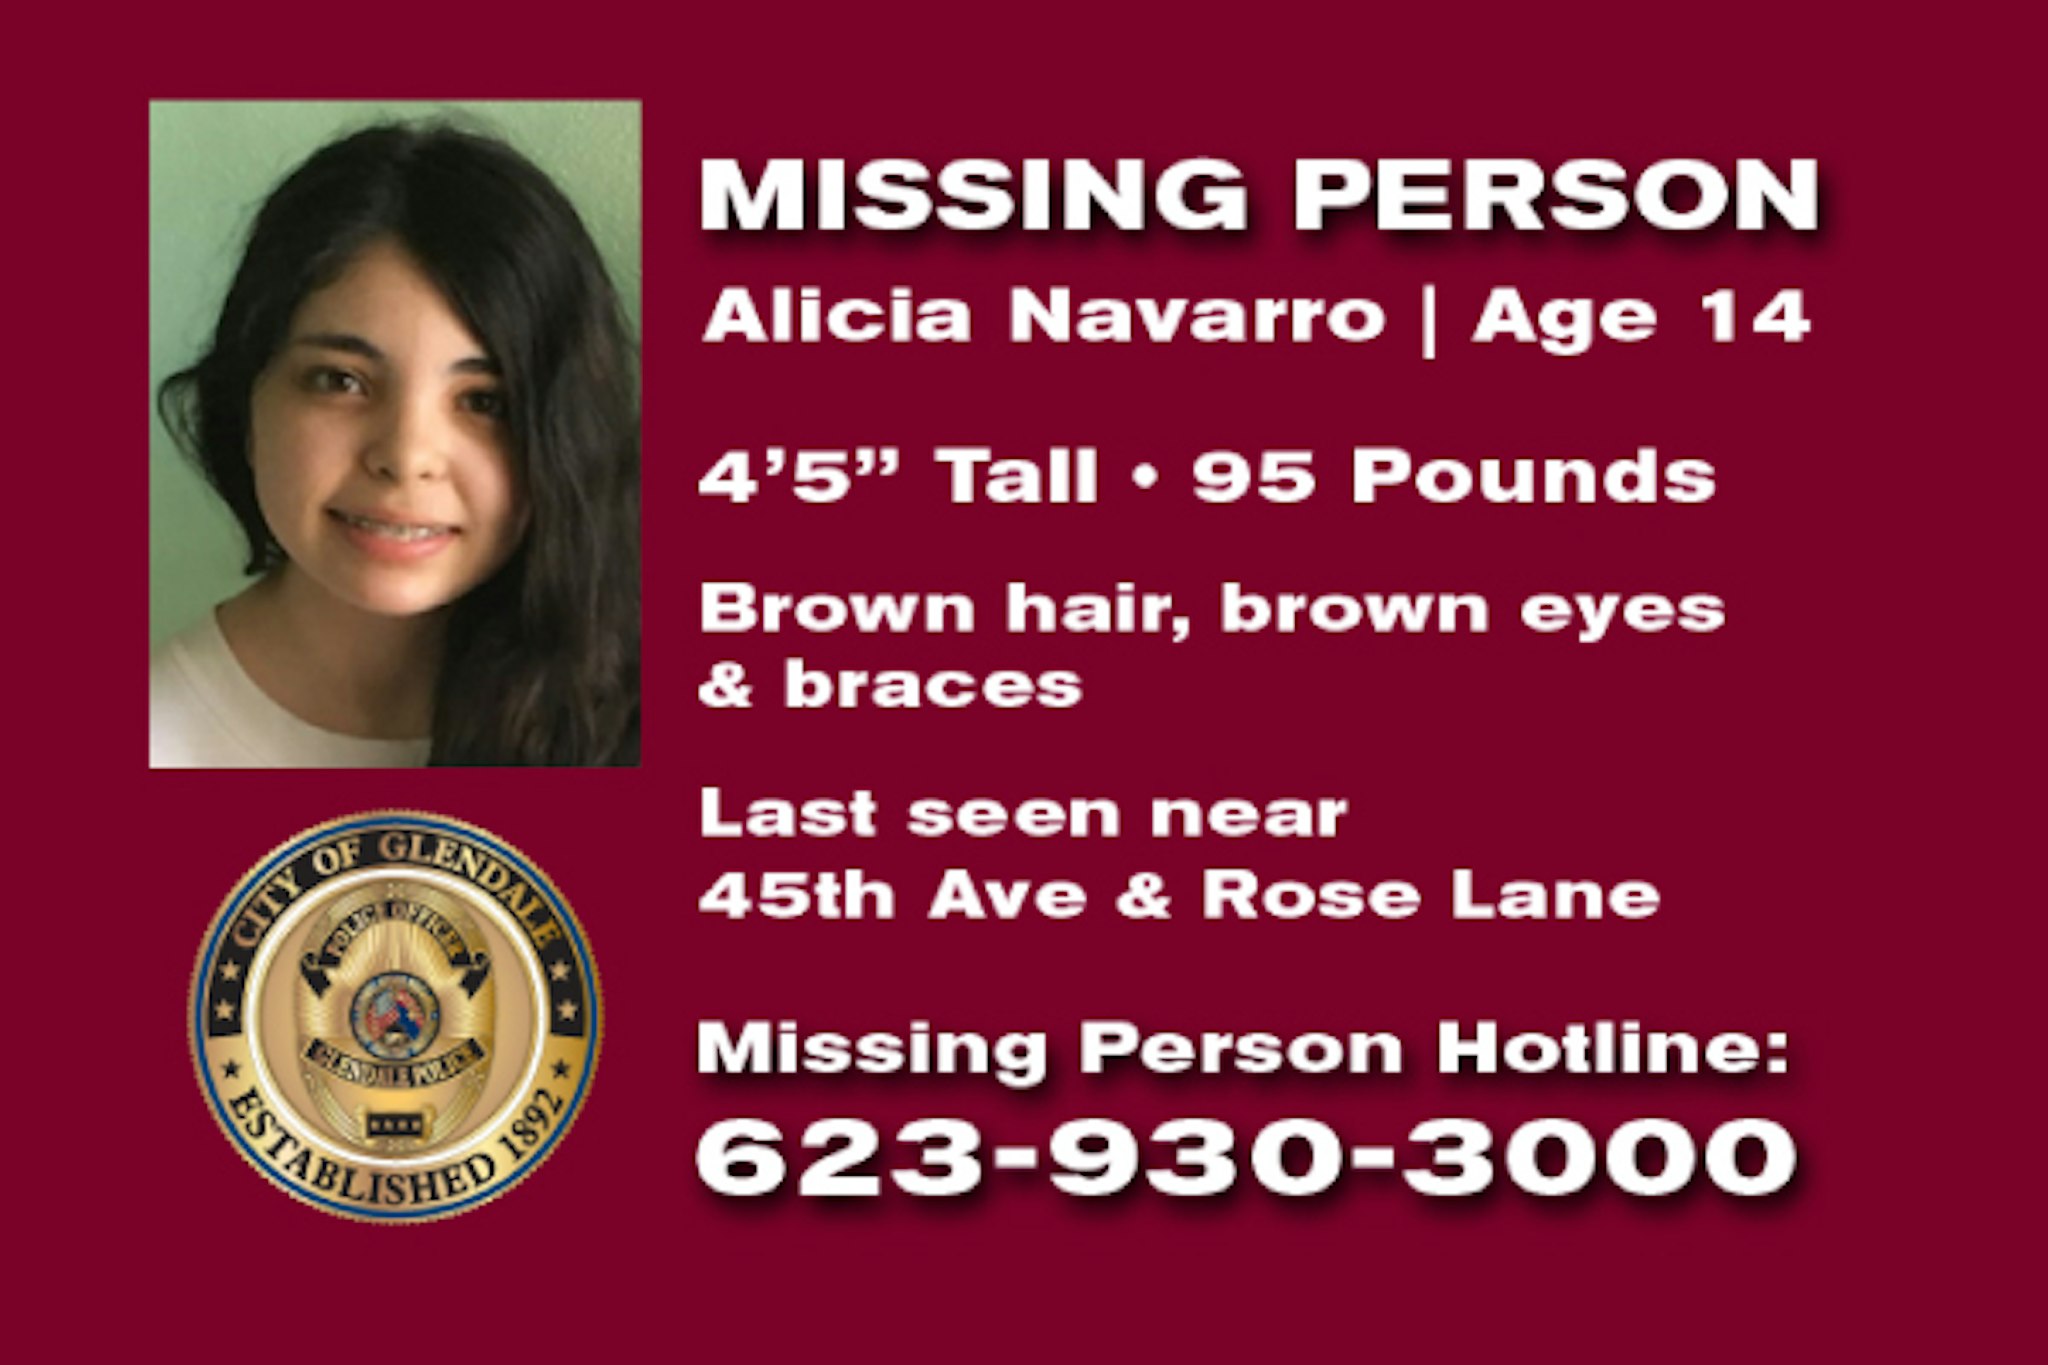 Alicia Navarro went missing in 2019 and has been found safe.